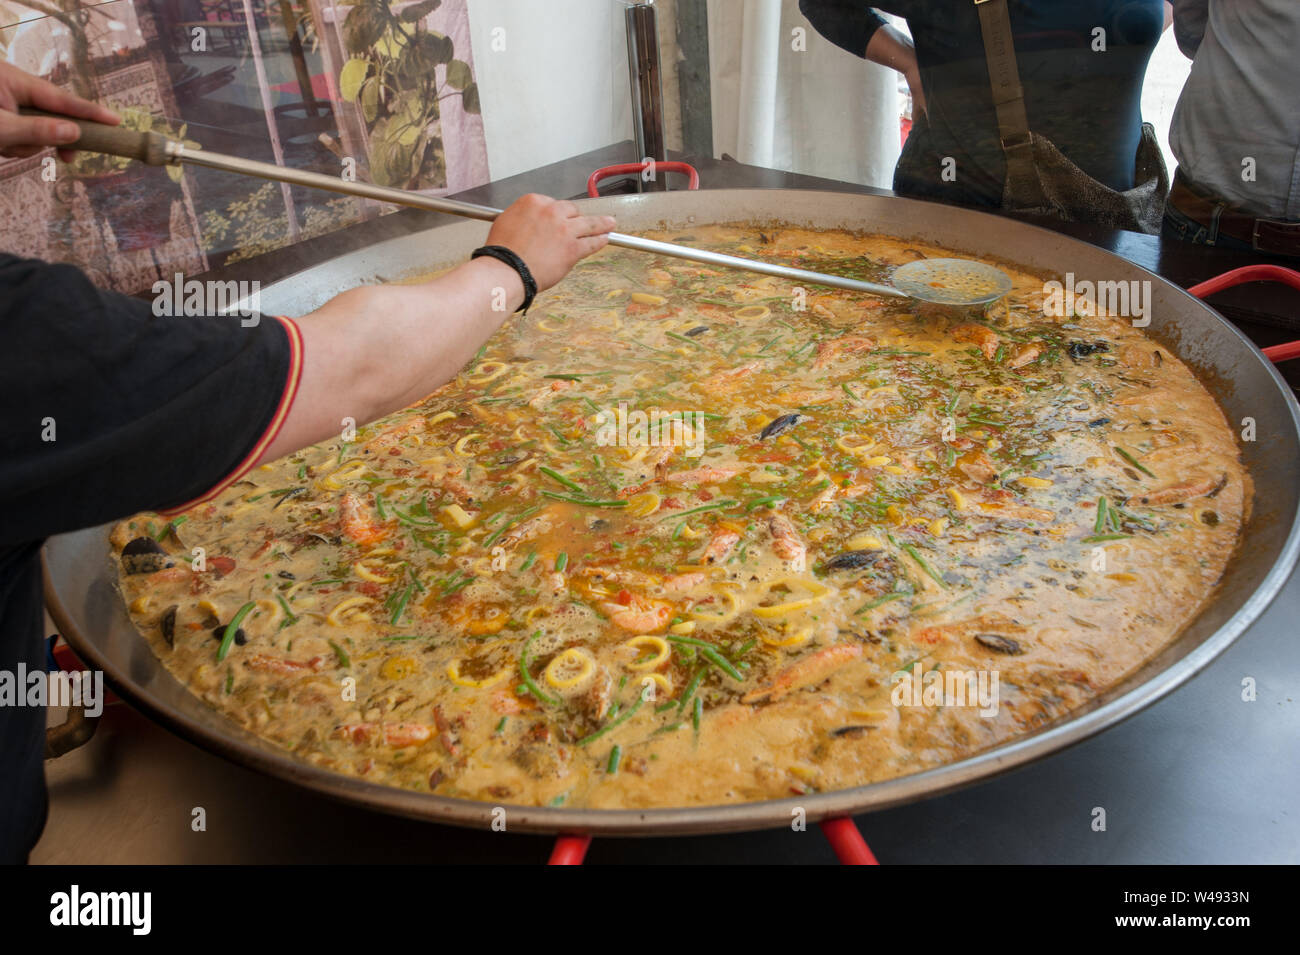 https://c8.alamy.com/comp/W4933N/chief-prepares-paella-with-seafood-mussels-shrimps-and-green-bean-in-a-extra-large-frying-pan-W4933N.jpg